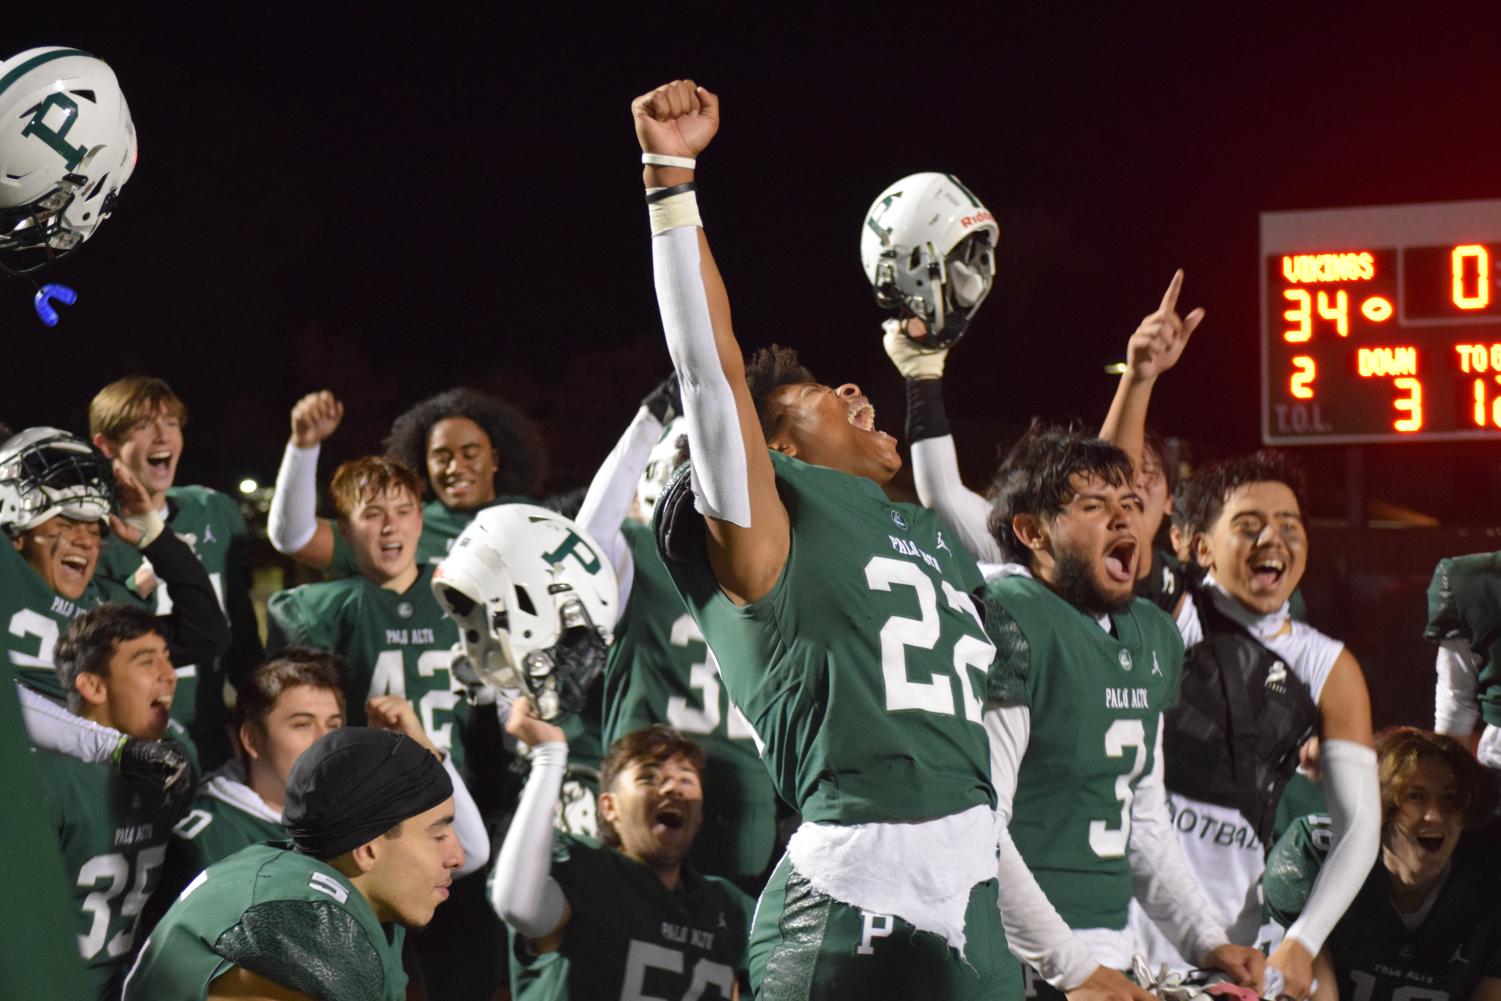 Vikings head to CCS finals after dominant victory over Spartans The